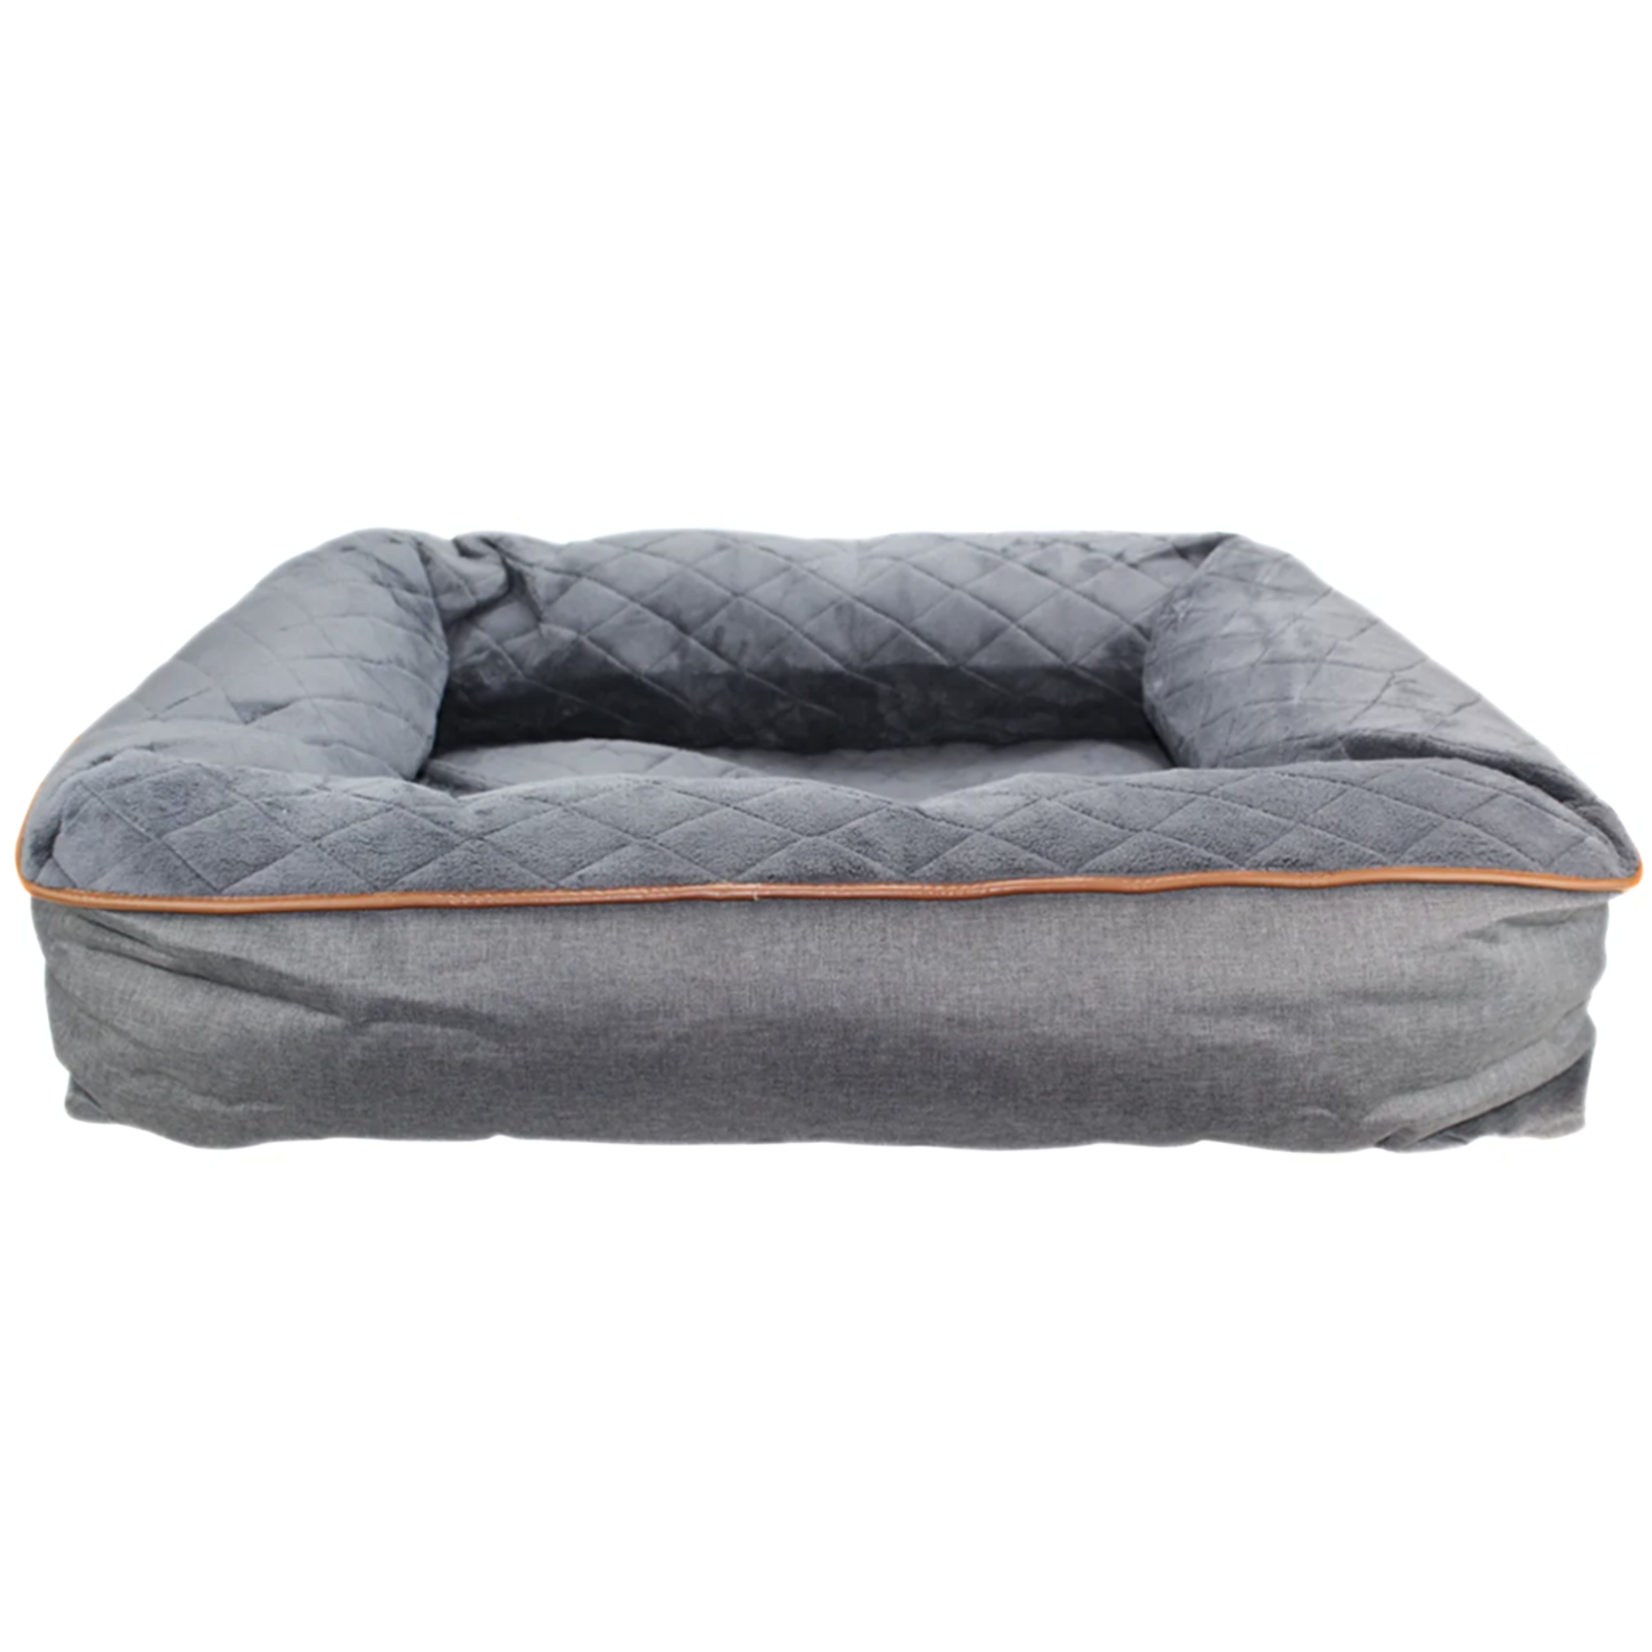 Be One Breed Be One Breed: Snuggle Bed: Dark Grey